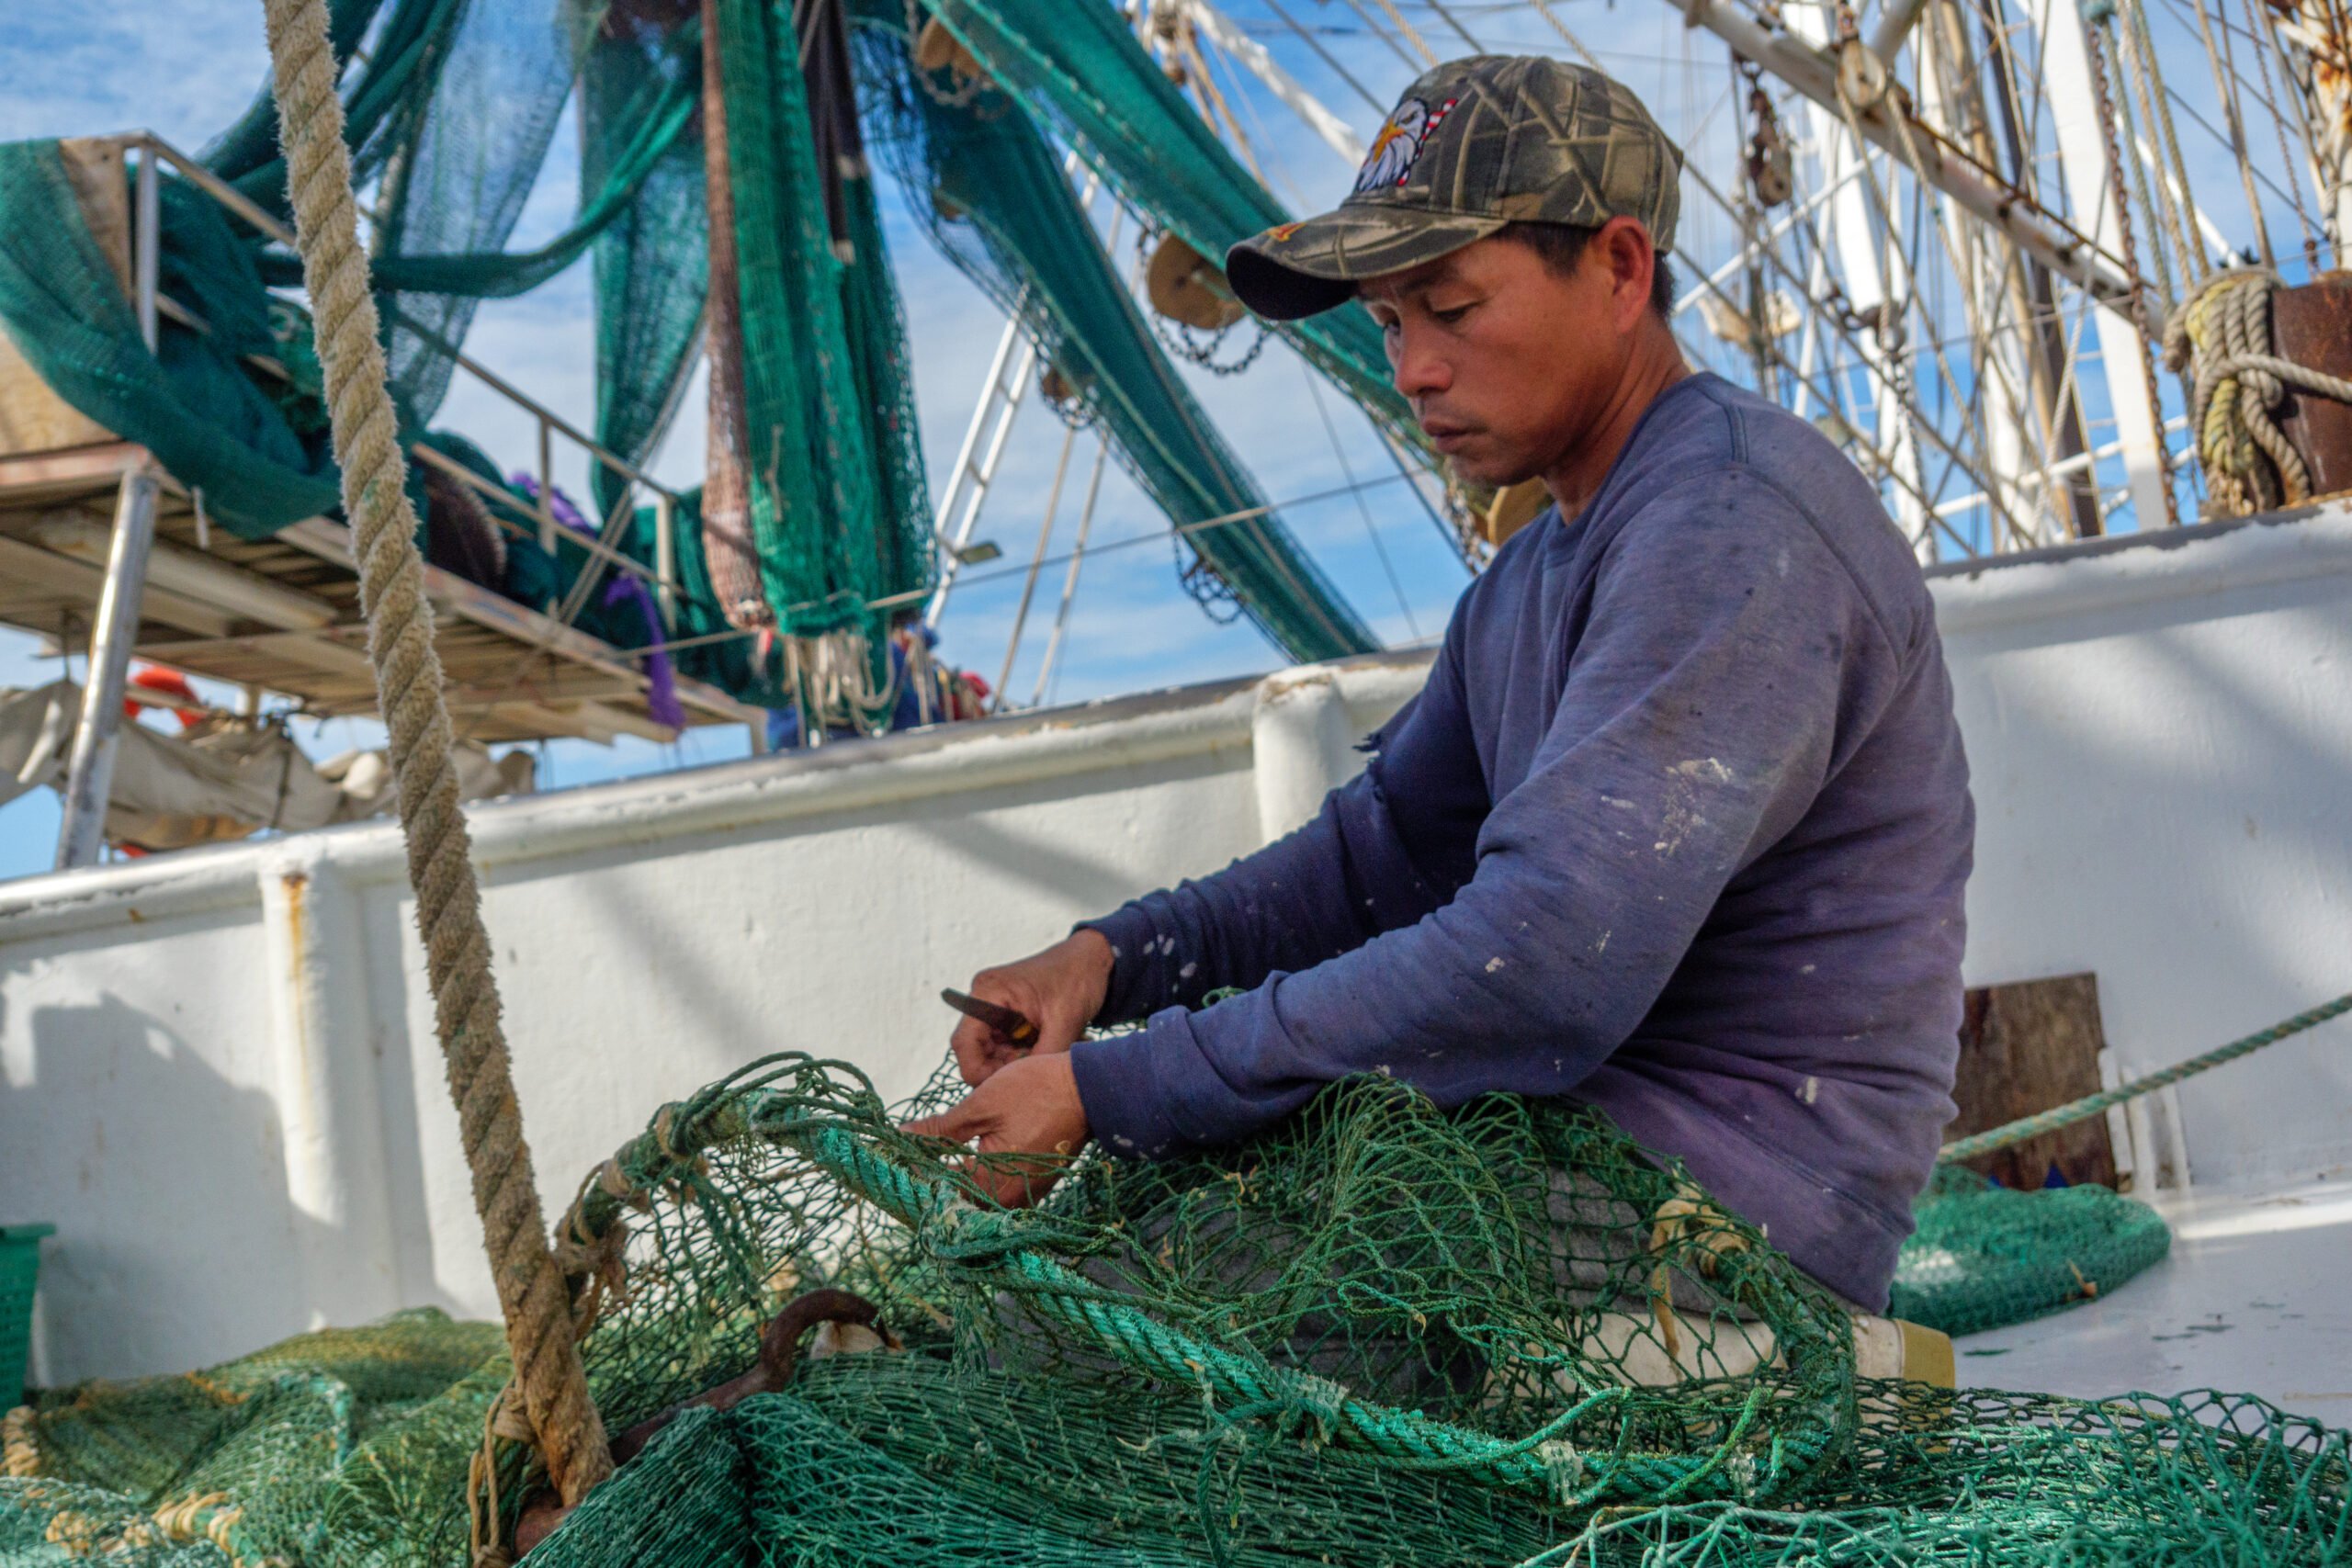 A Vietnamese man works on bright green shrimp nets aboard the slanted deck of a shrimp boat at sea.